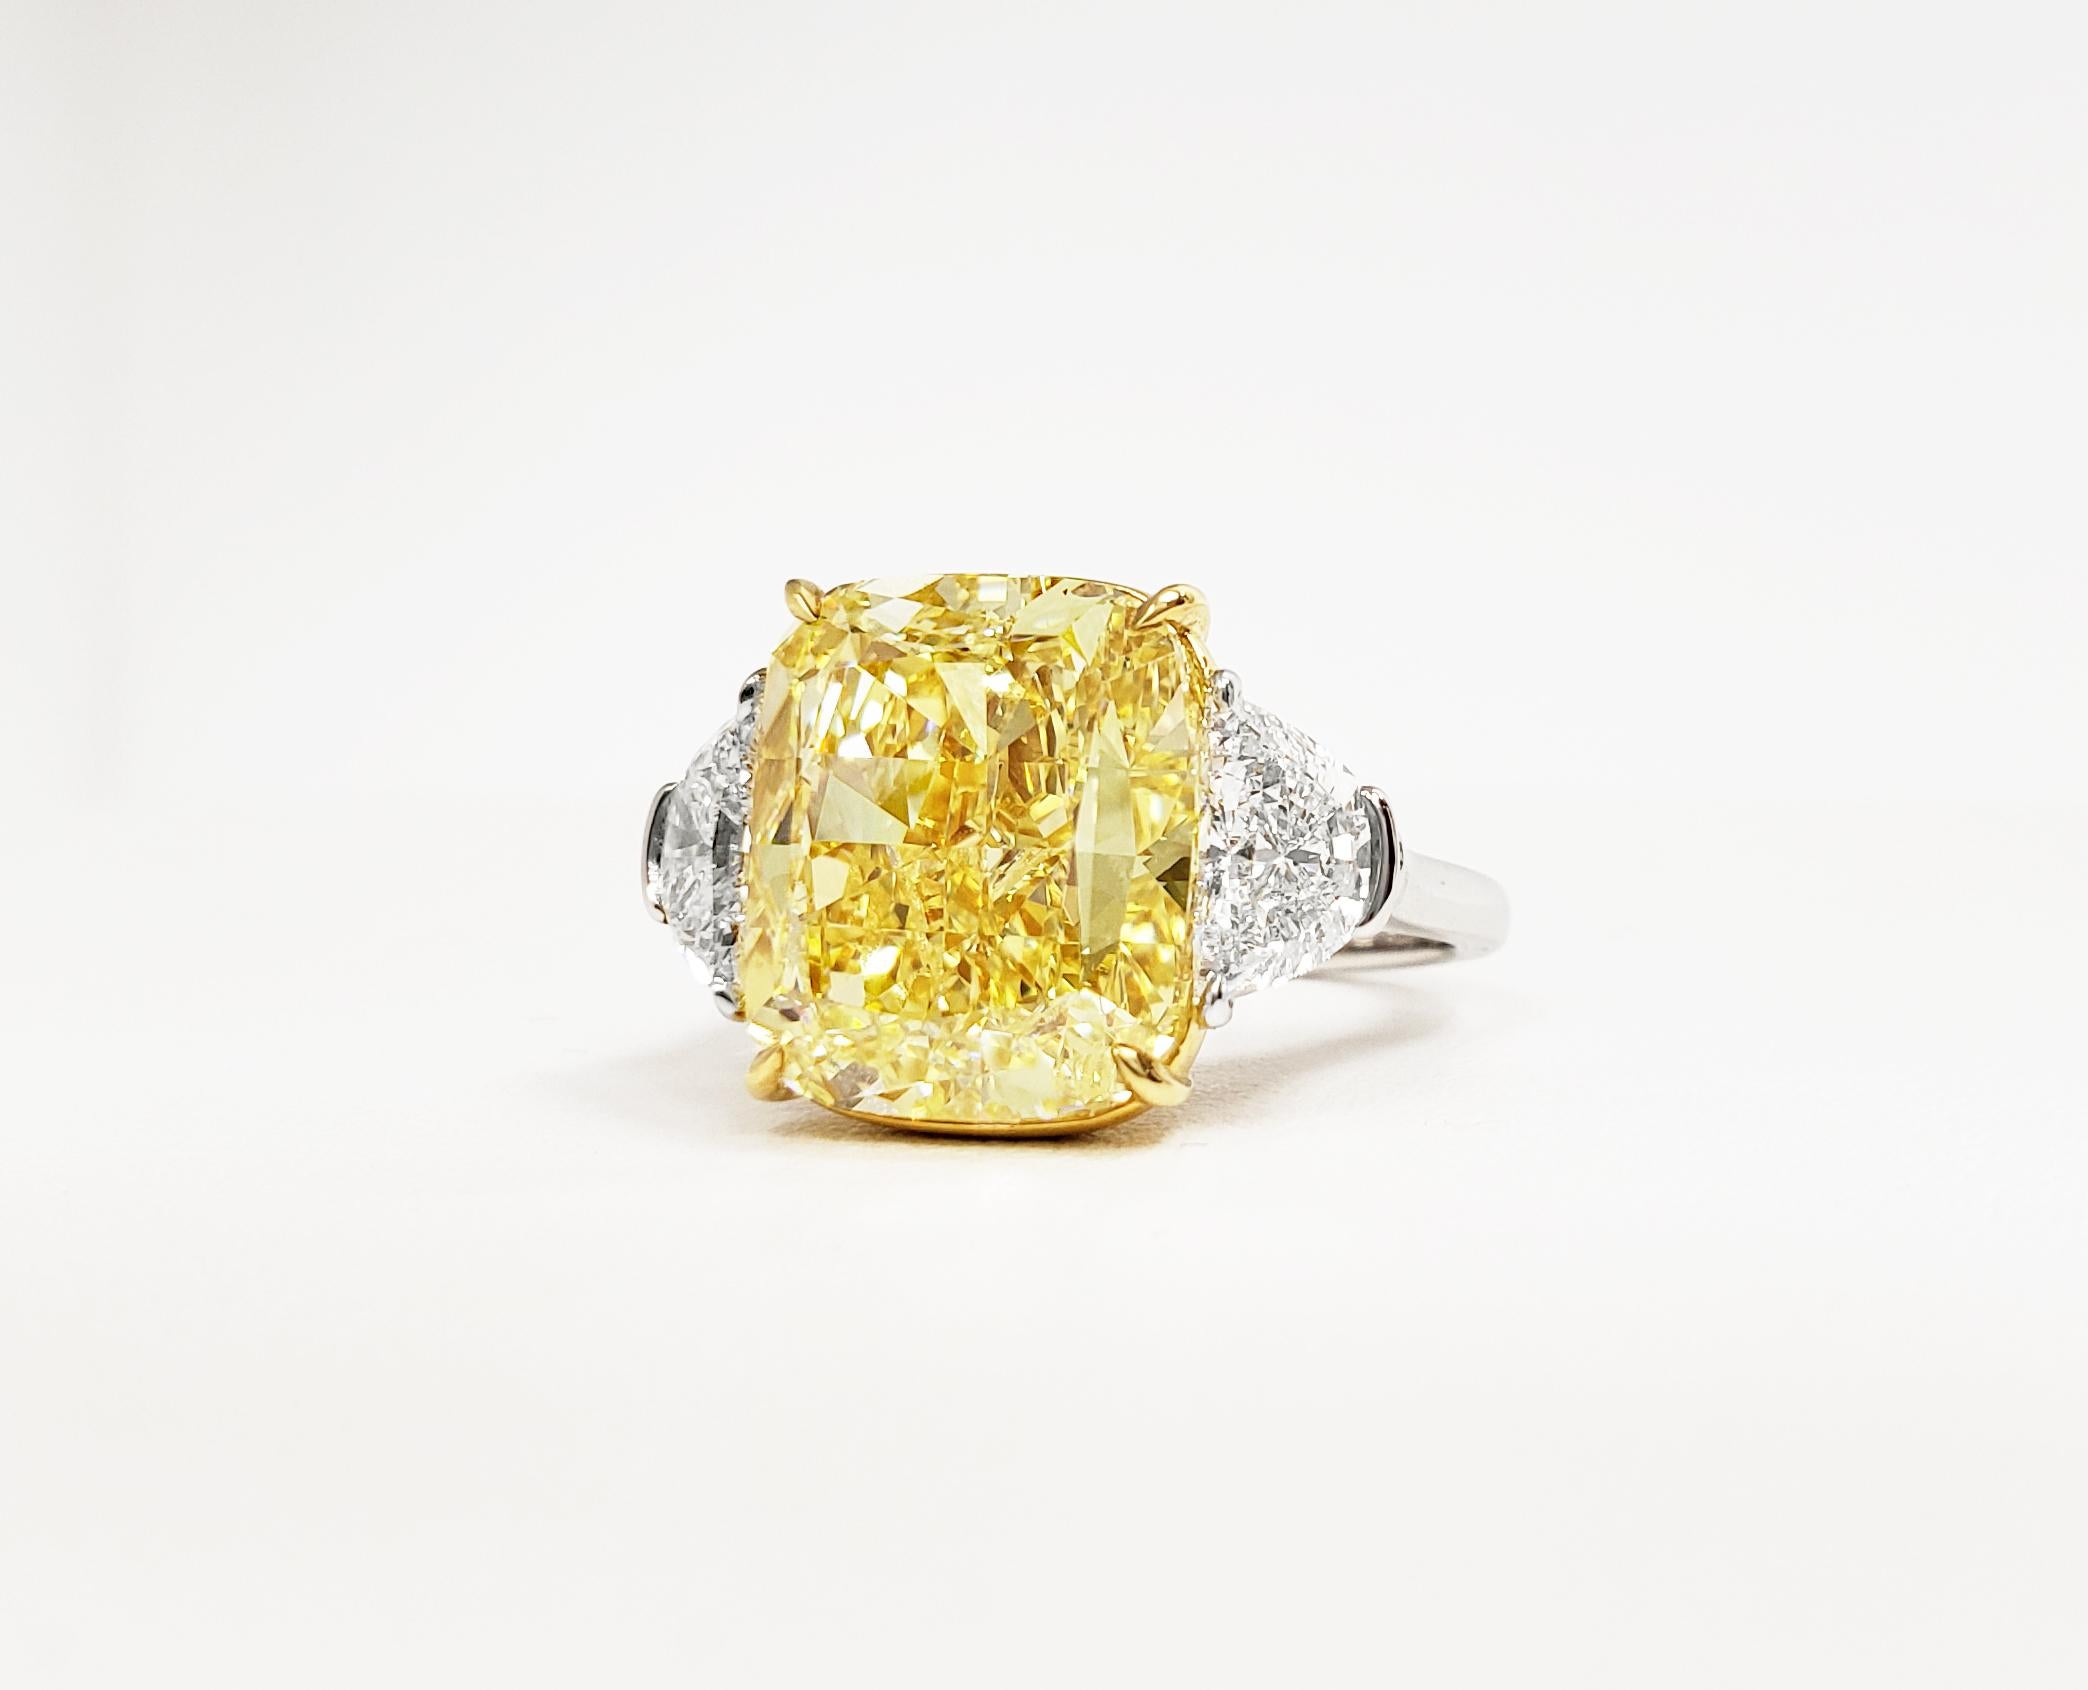 Scarselli Classic Ring with 10.11 carat Fancy Intense Yellow Diamond, cushion cut, VS1 clarity GIA certified, mounted in 18k yellow gold basket. Accompanied by two side halves white diamonds 1.38 TCW This ring may be sized or re-designed with